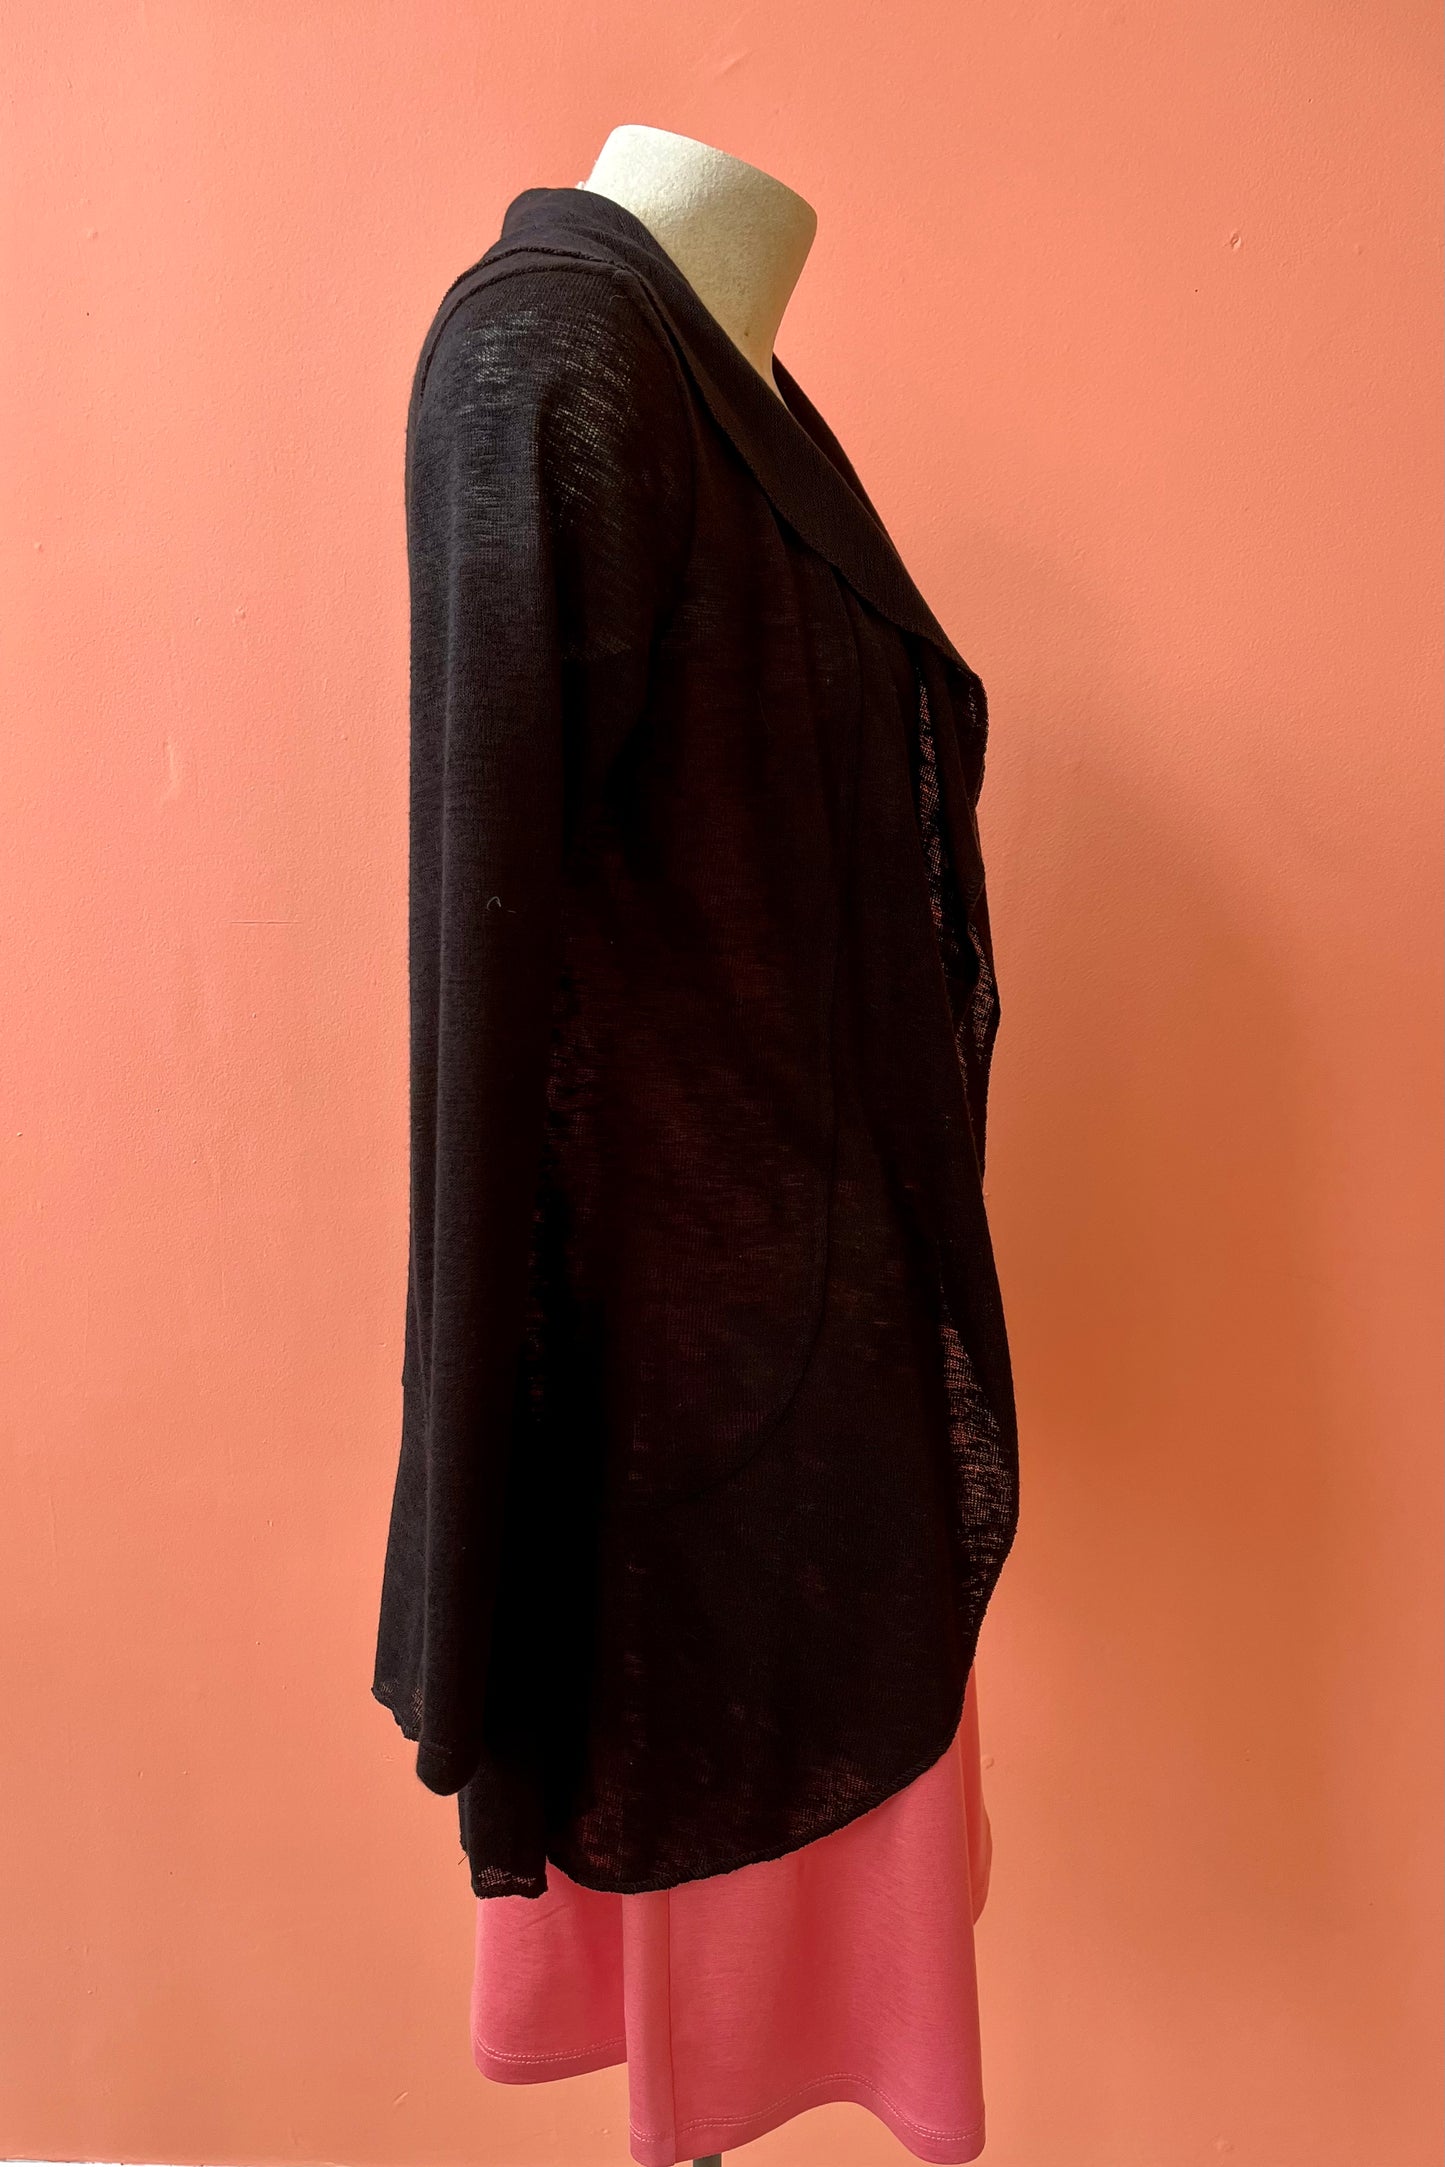 Chi Chi Cardigan by Yul Voy, Black, side view, open cardigan, lightweight knit, wide collar, long sleeves, rounded hem is shorter in the front, sizes XS to XXL, made in Montreal